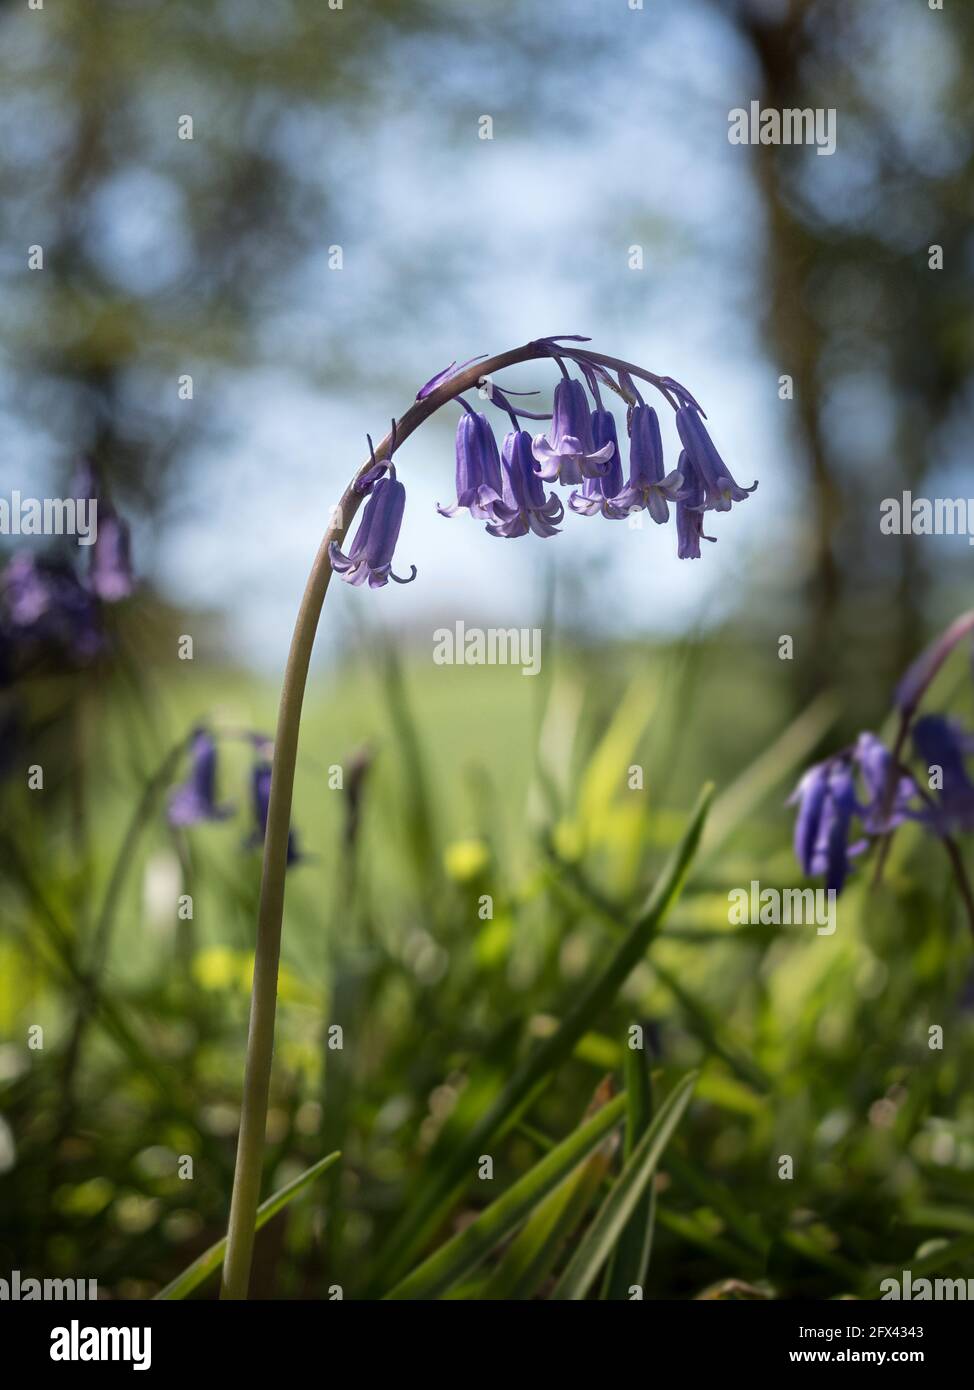 a Single stem of English Bluebells curving hanging shape silhouette echo eiyh backlit bokeh background of sky and trees with grass in foreground Stock Photo